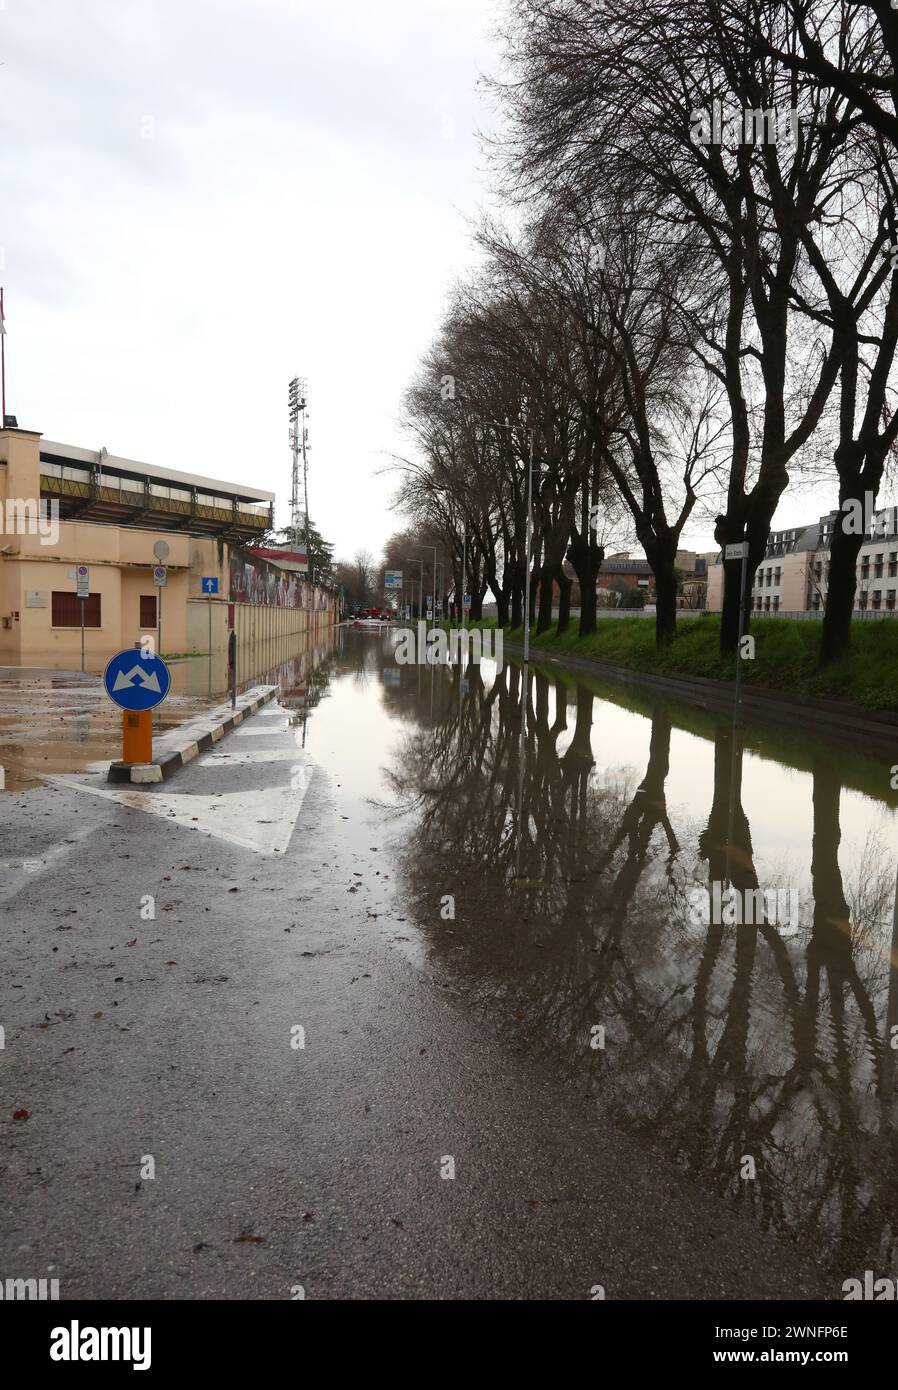 street of the city completely flooded after the flooding of the river due to the torrential rain and the ancient sewage system Stock Photo